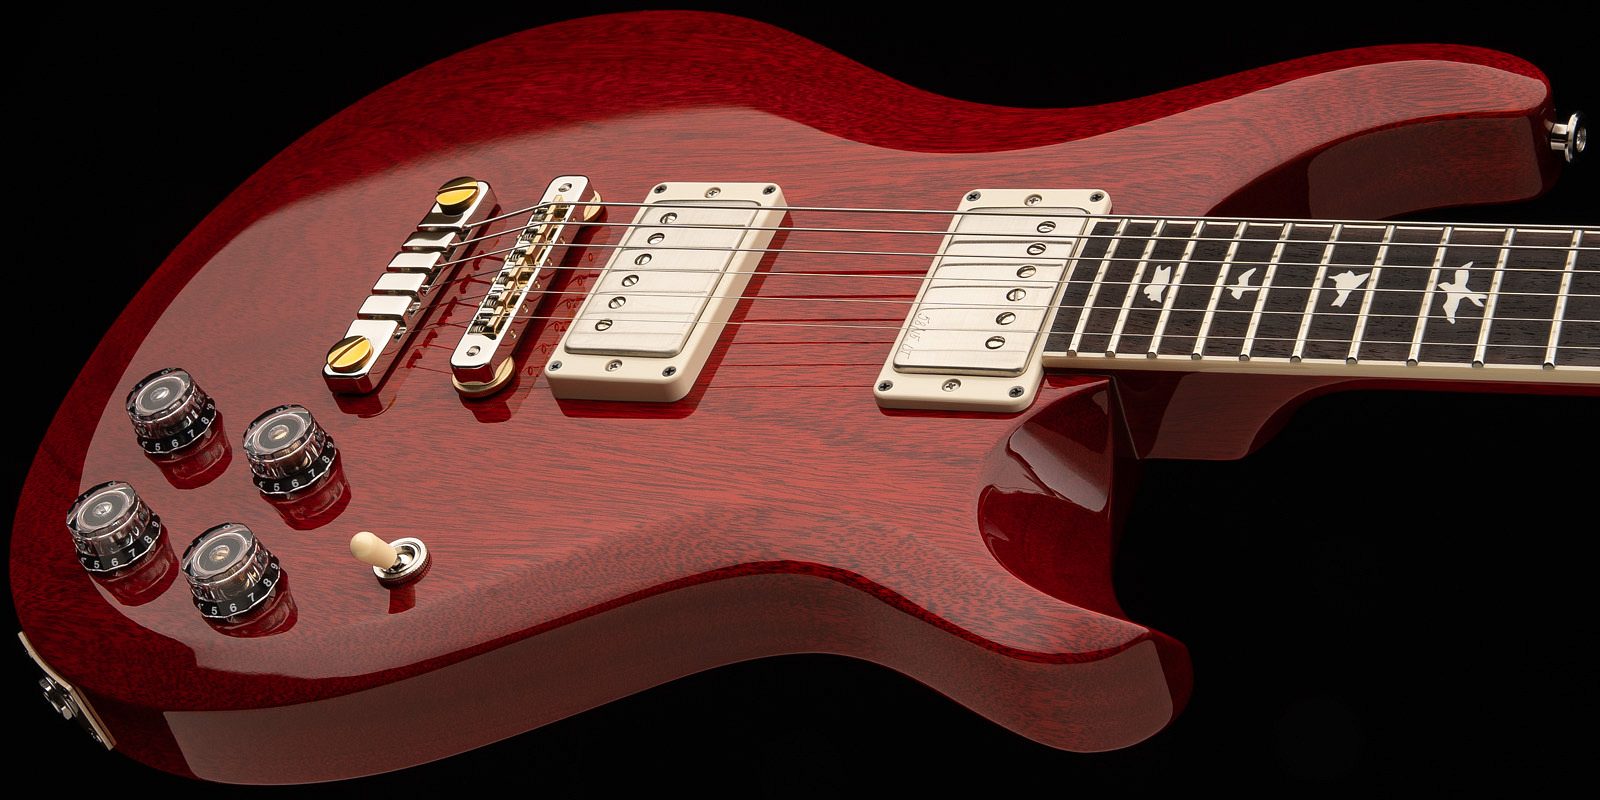 S2 mccarty 594 thinline hero a